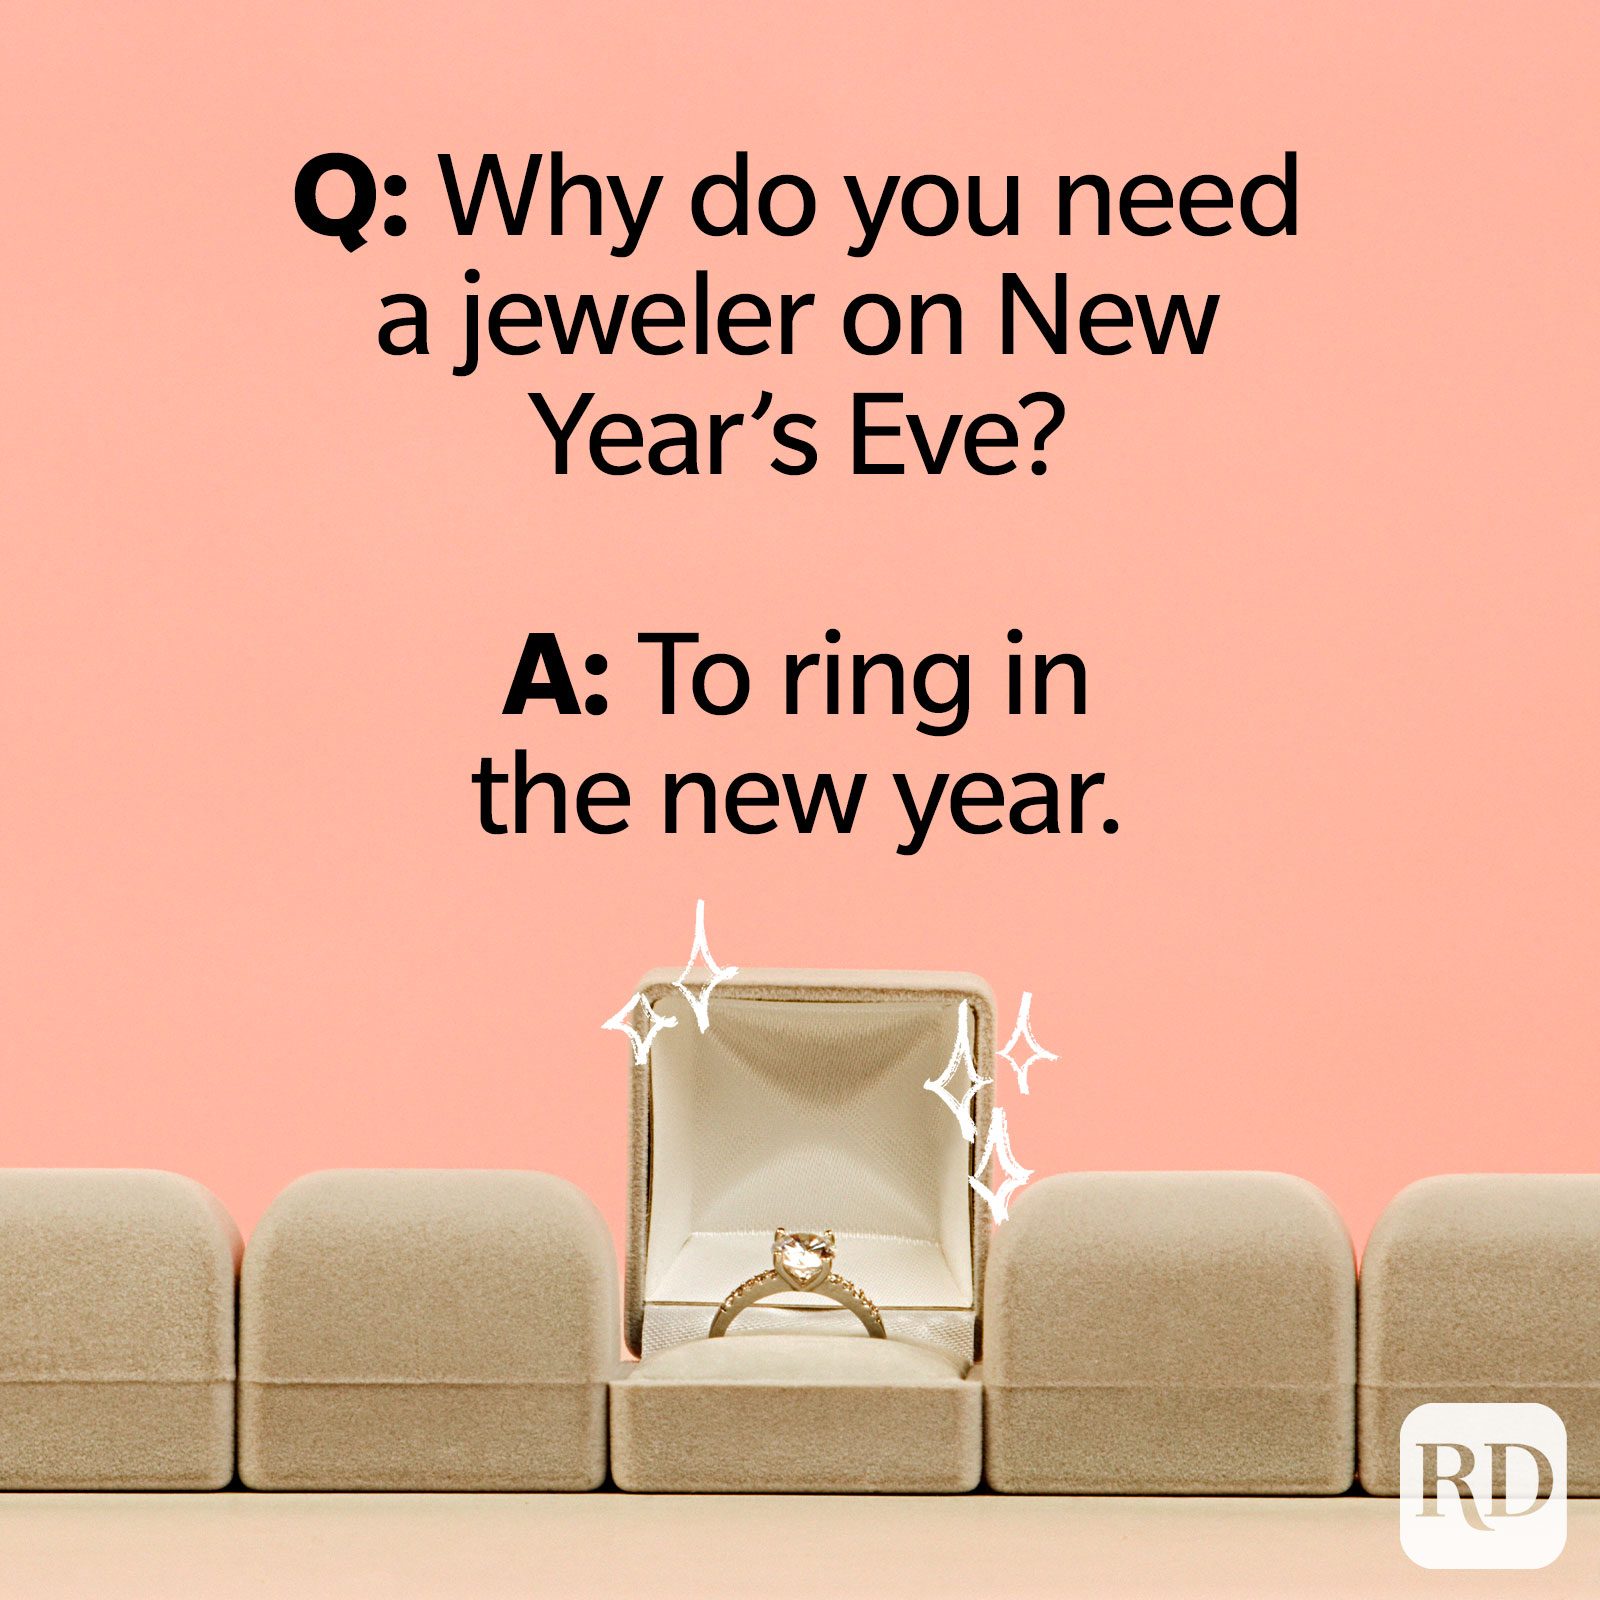 30 Of The Funniest New Years Jokes Readers Digest